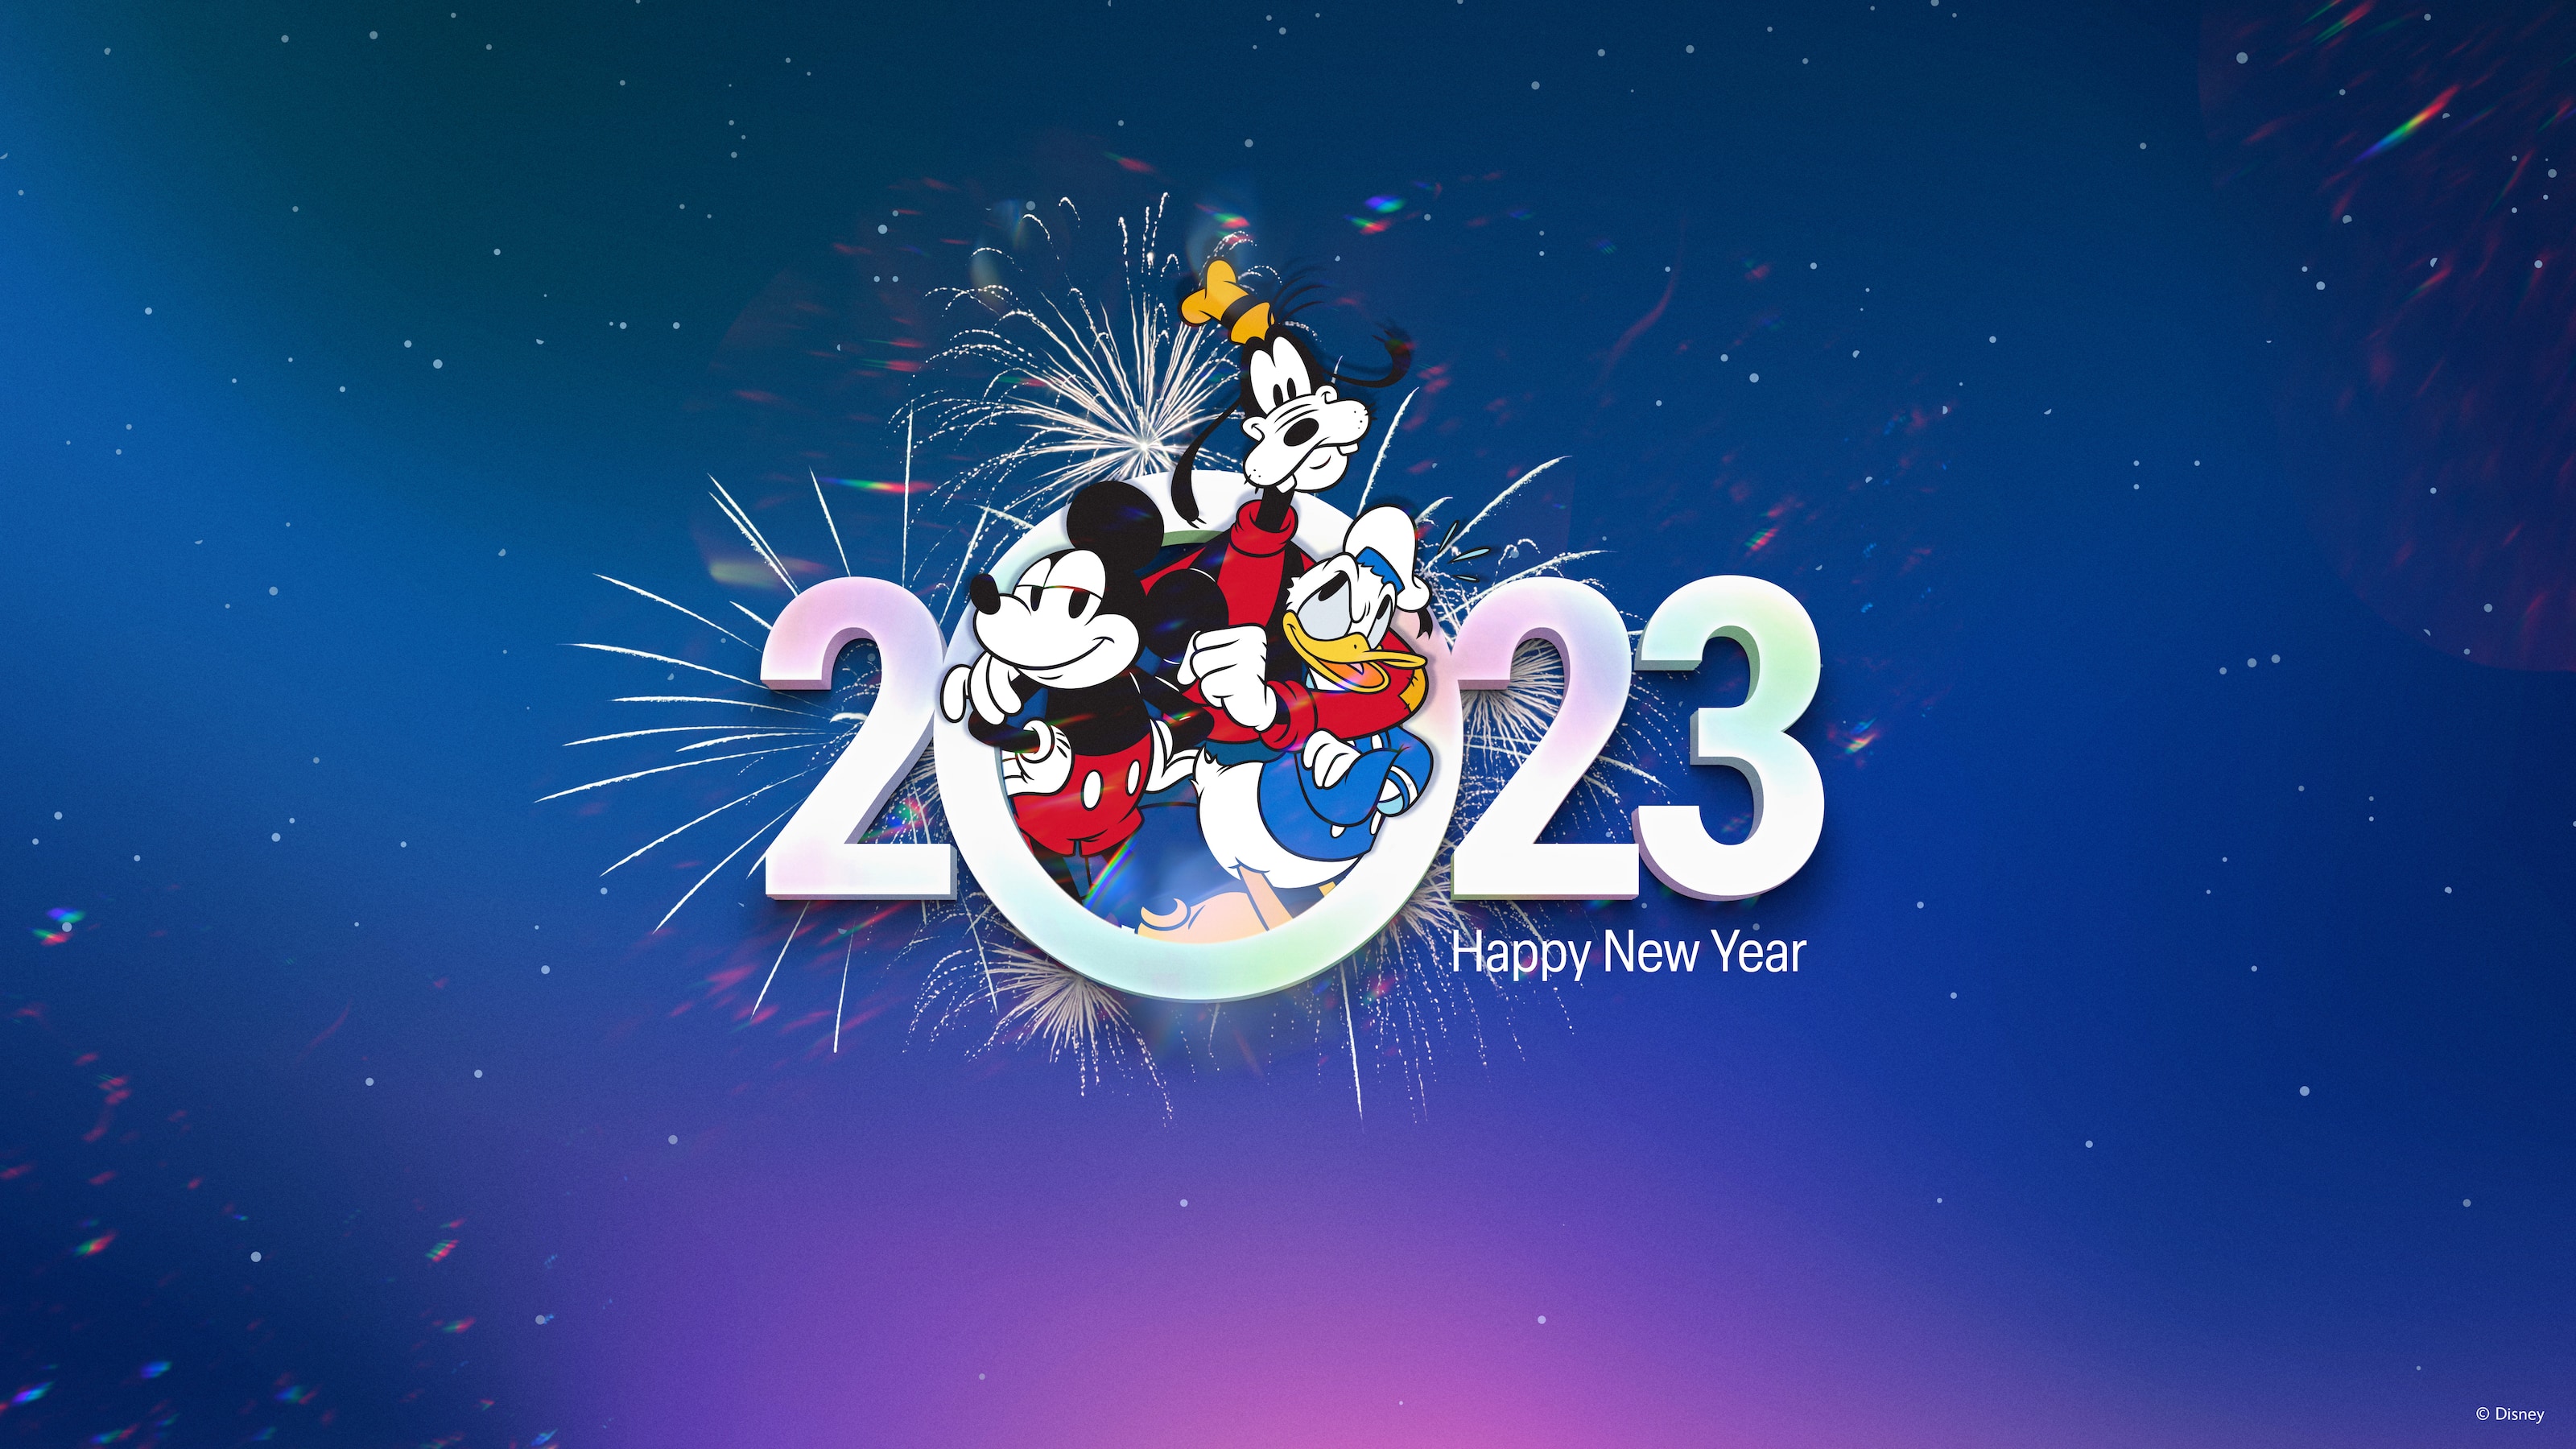 Happy New Year 2023 From Mickey Mouse, Donald Duck And Goofy